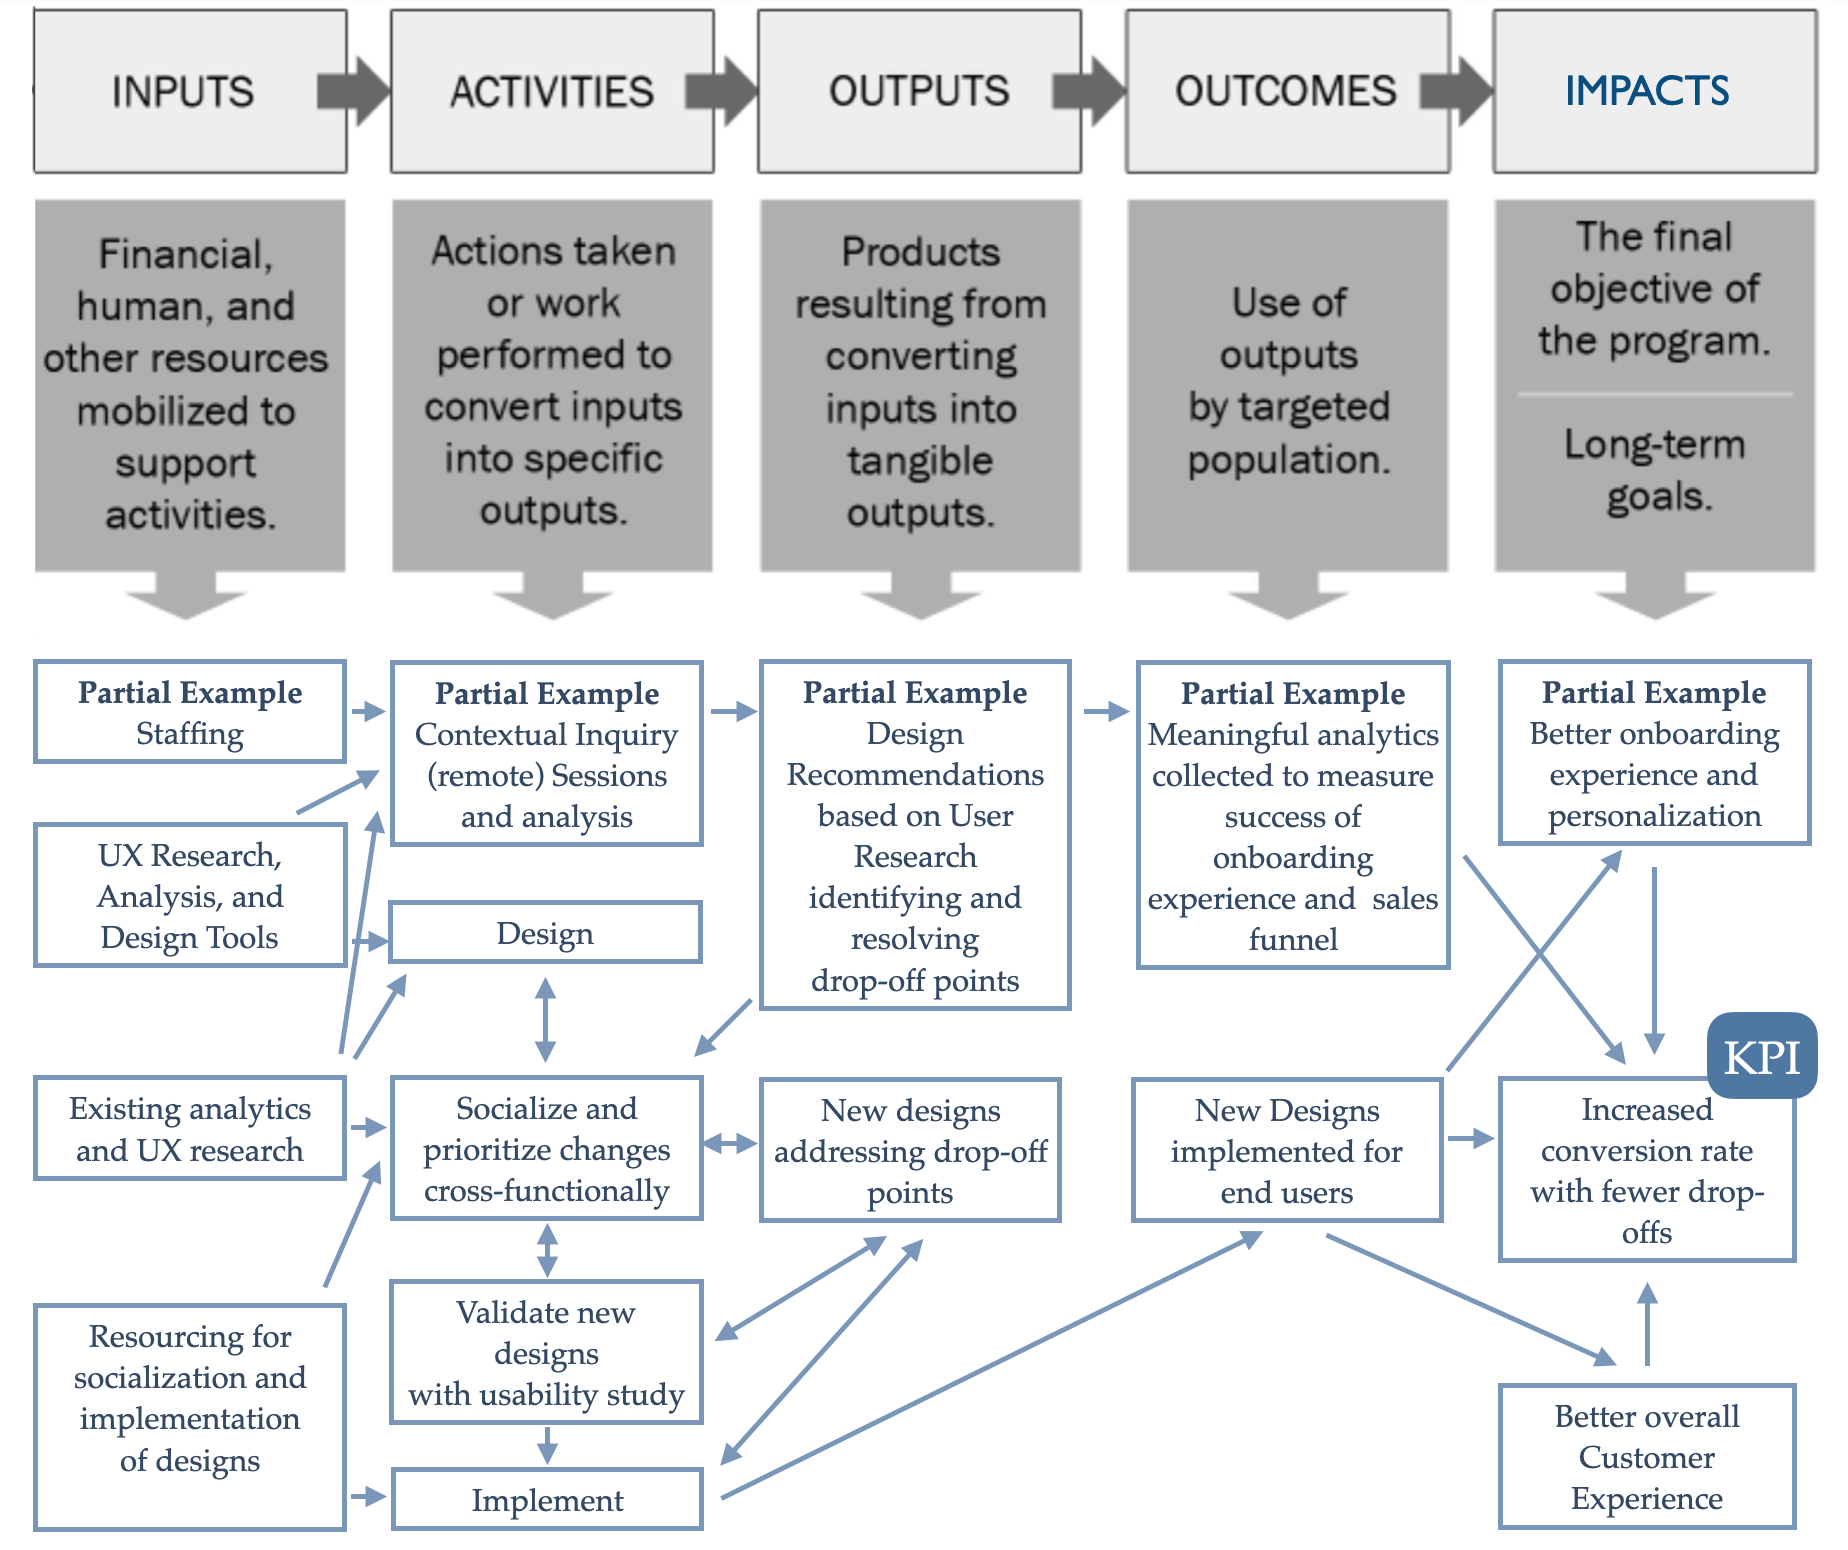 Adapted from Gertler, P. J., Martinez, S., Premand, P., Rawlings, L. B., &amp; Vermeersch, C. M. J. (2010). Impact Evaluation in Practice. The World Bank. https://doi.org/10.1596/978-0-8213-8541-8.